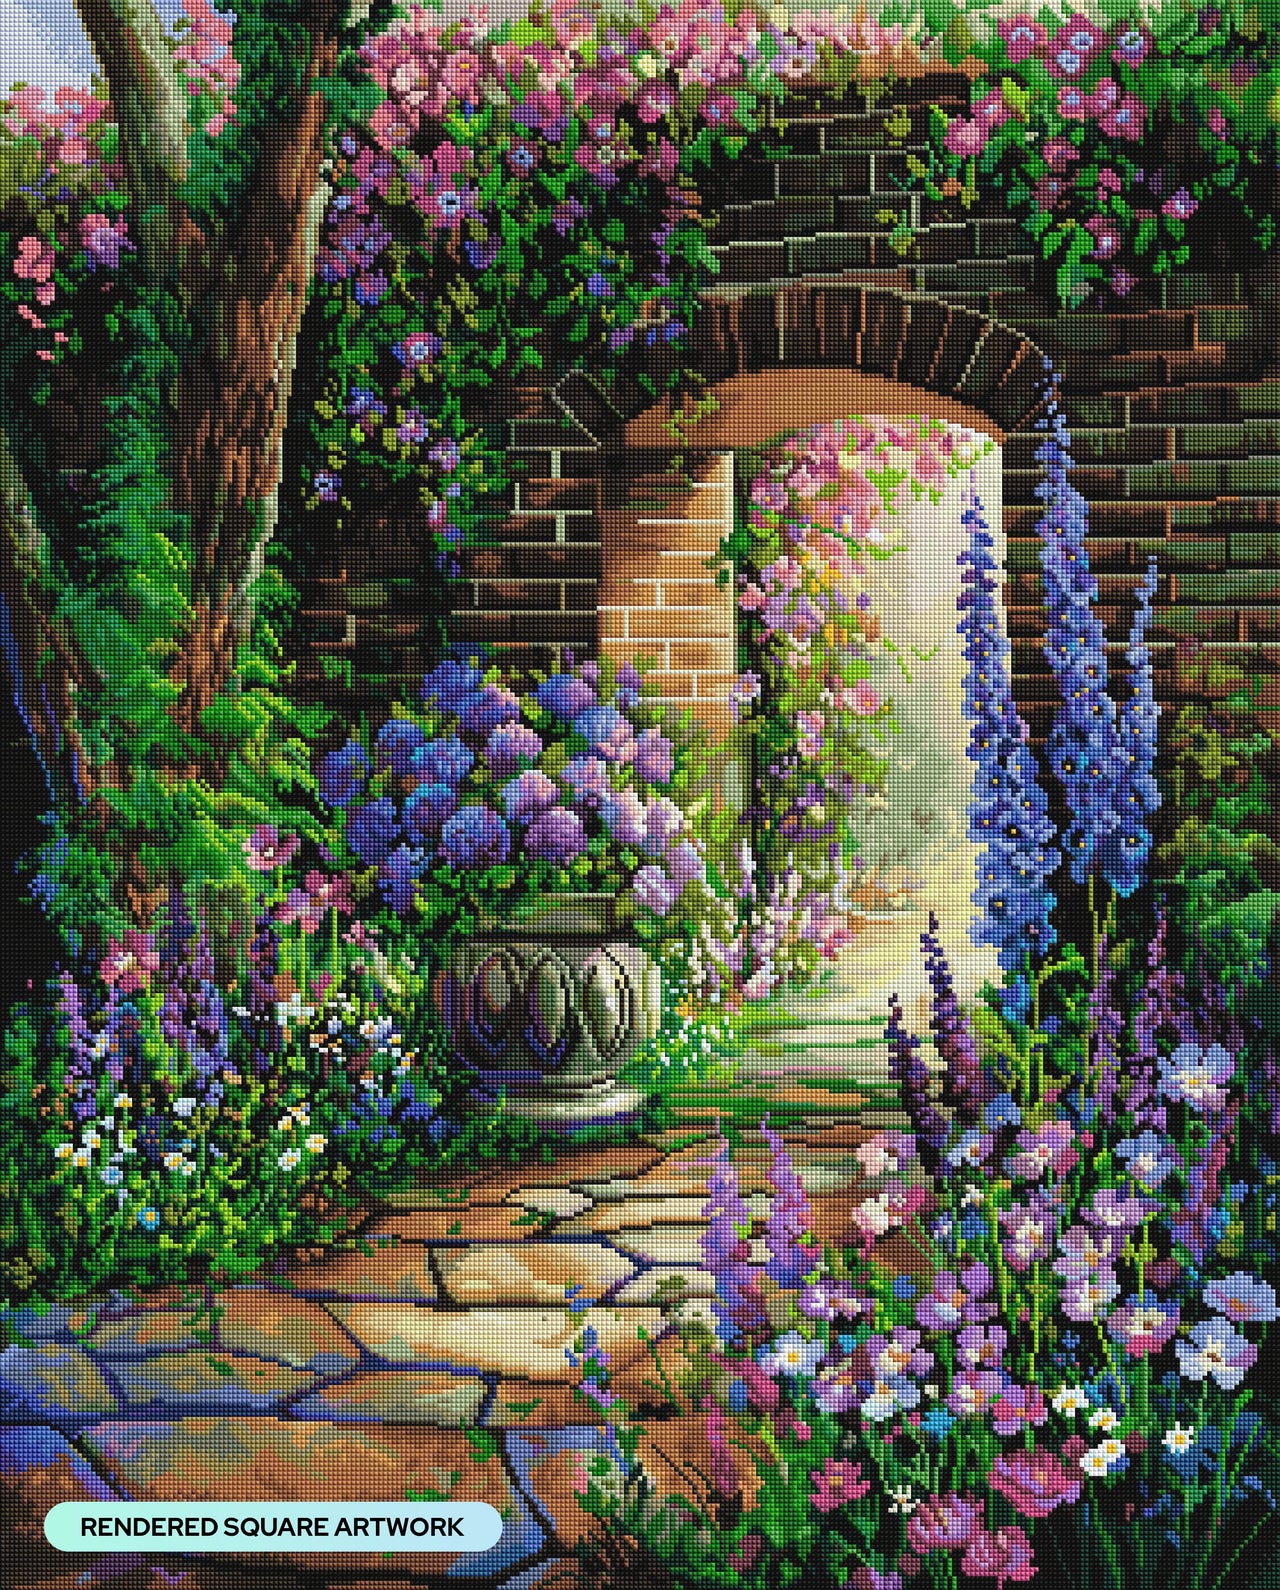 Diamond Painting Poet's Retreat 27.6" x 34.3" (70cm x 87cm) / Square With 67 Colors Including 5 ABs and 1 Fairy Dust Diamond / 98,069